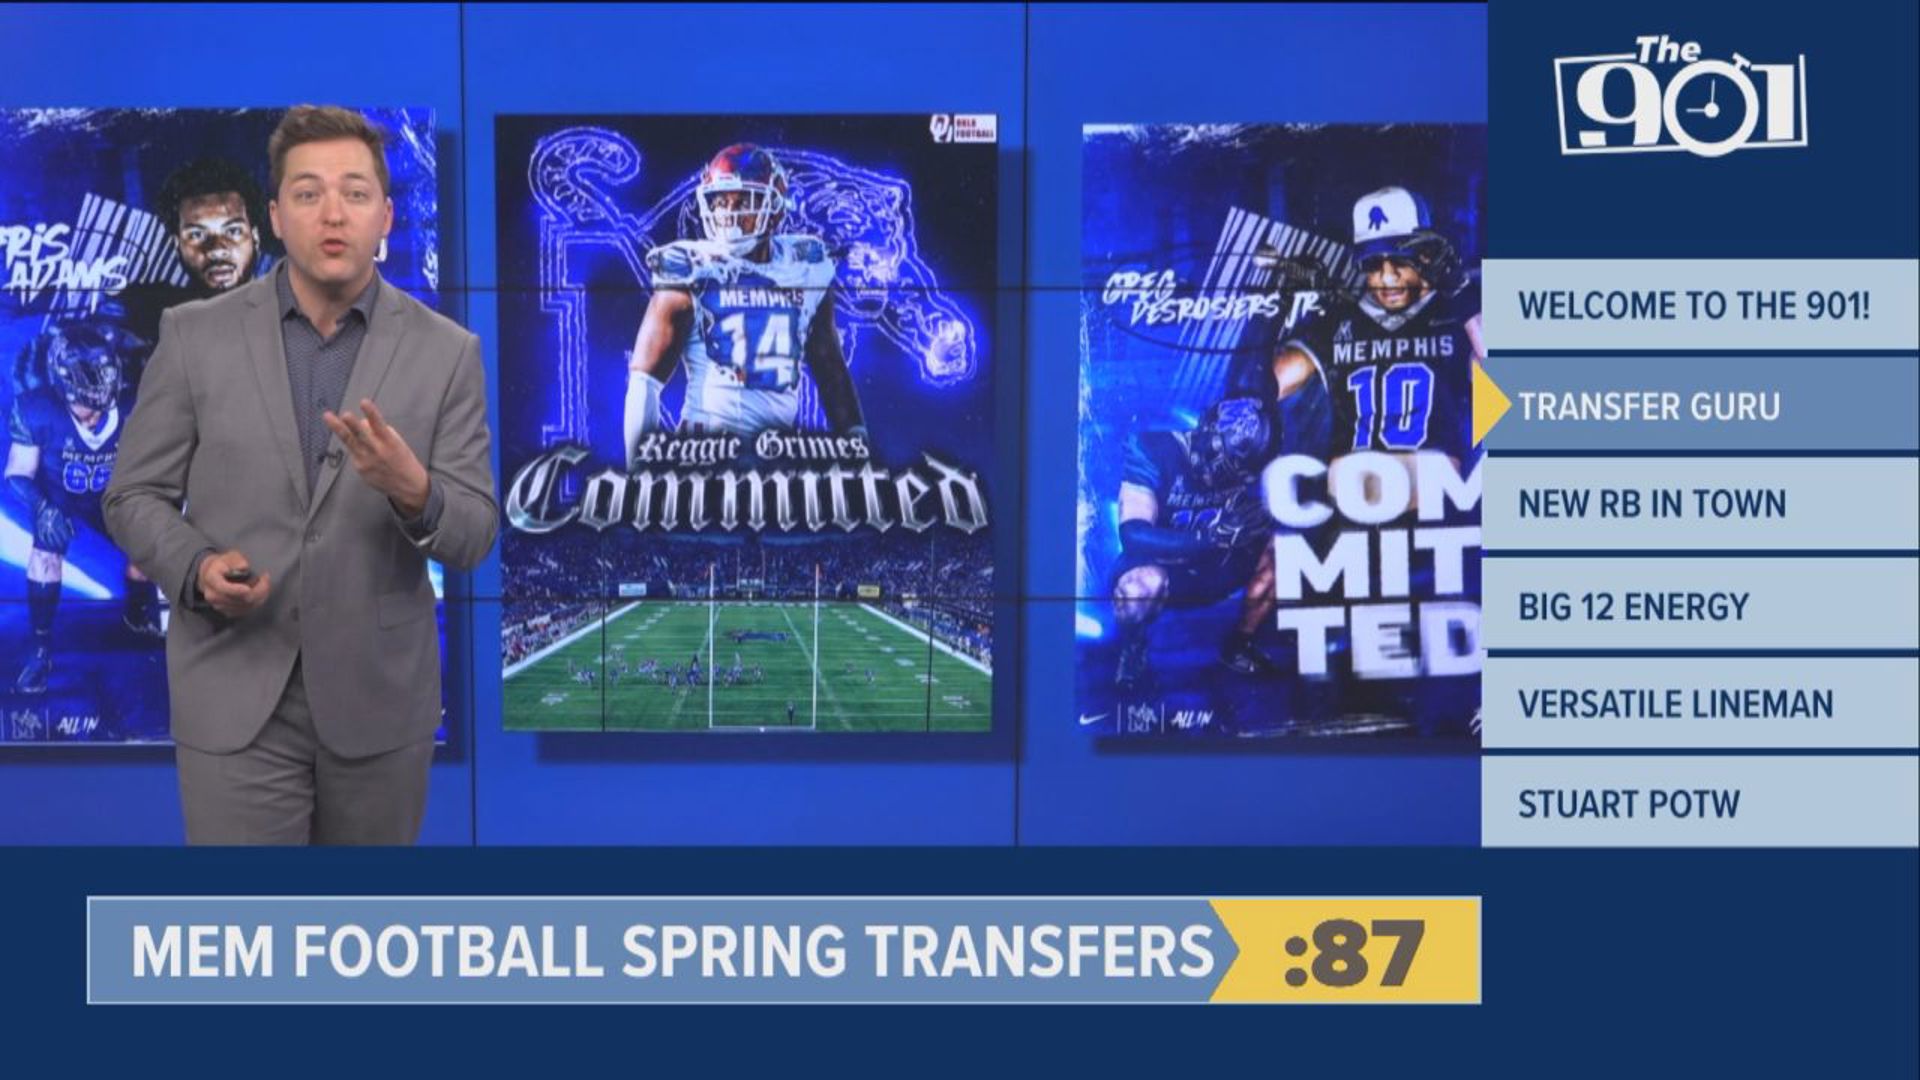 Head coach Ryan Silverfield and the Memphis Tigers secure three key transfers during the Spring transfer window.